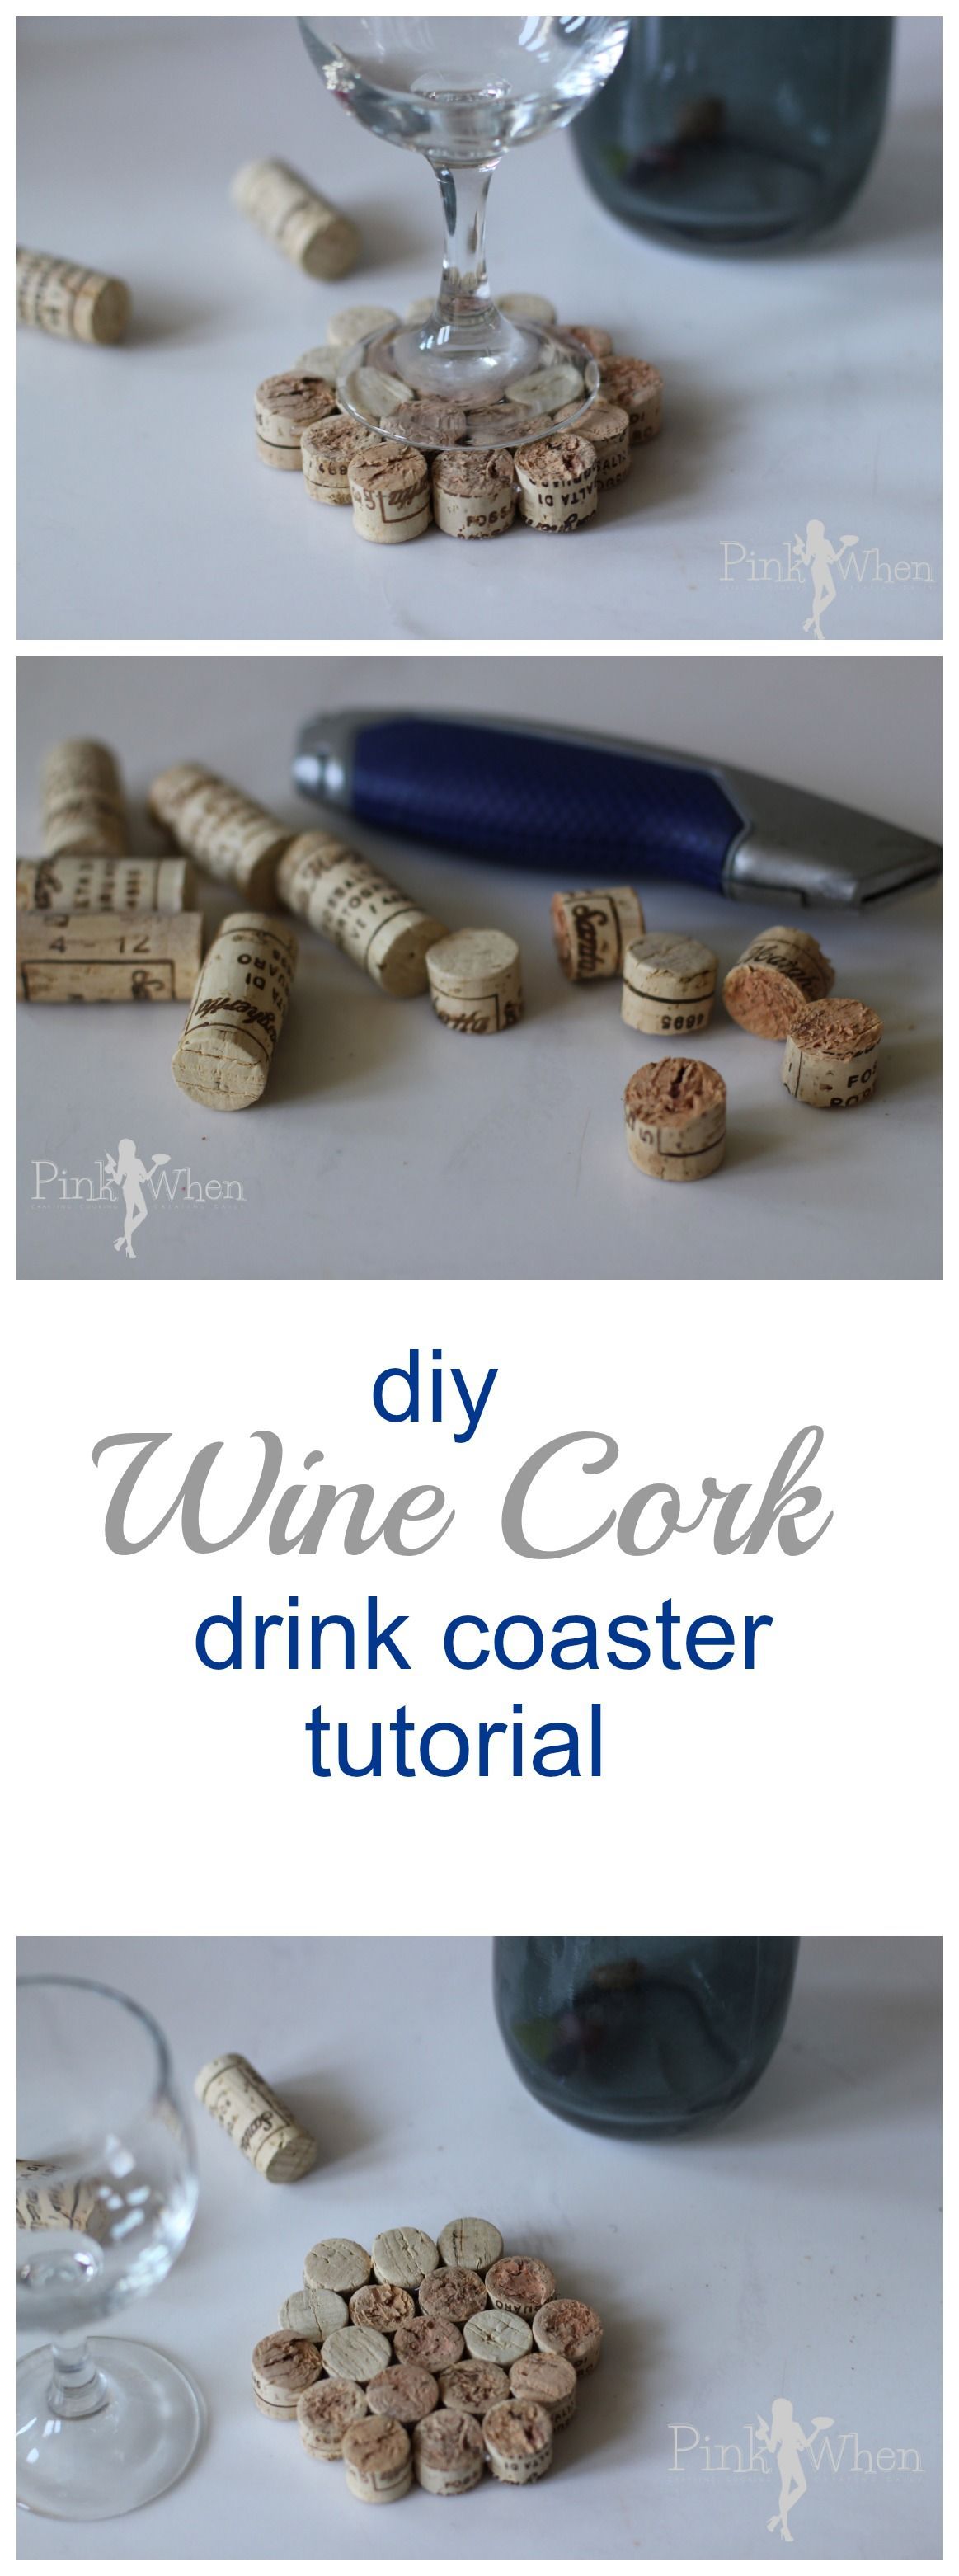 A quick and cute DIY Wine Cork Drink Coaster Tutorial - Cut the corks in thirds, sand off rough edges, hot glue together! - Use at table setting ans send home as party favor? -   24 cork crafts table ideas